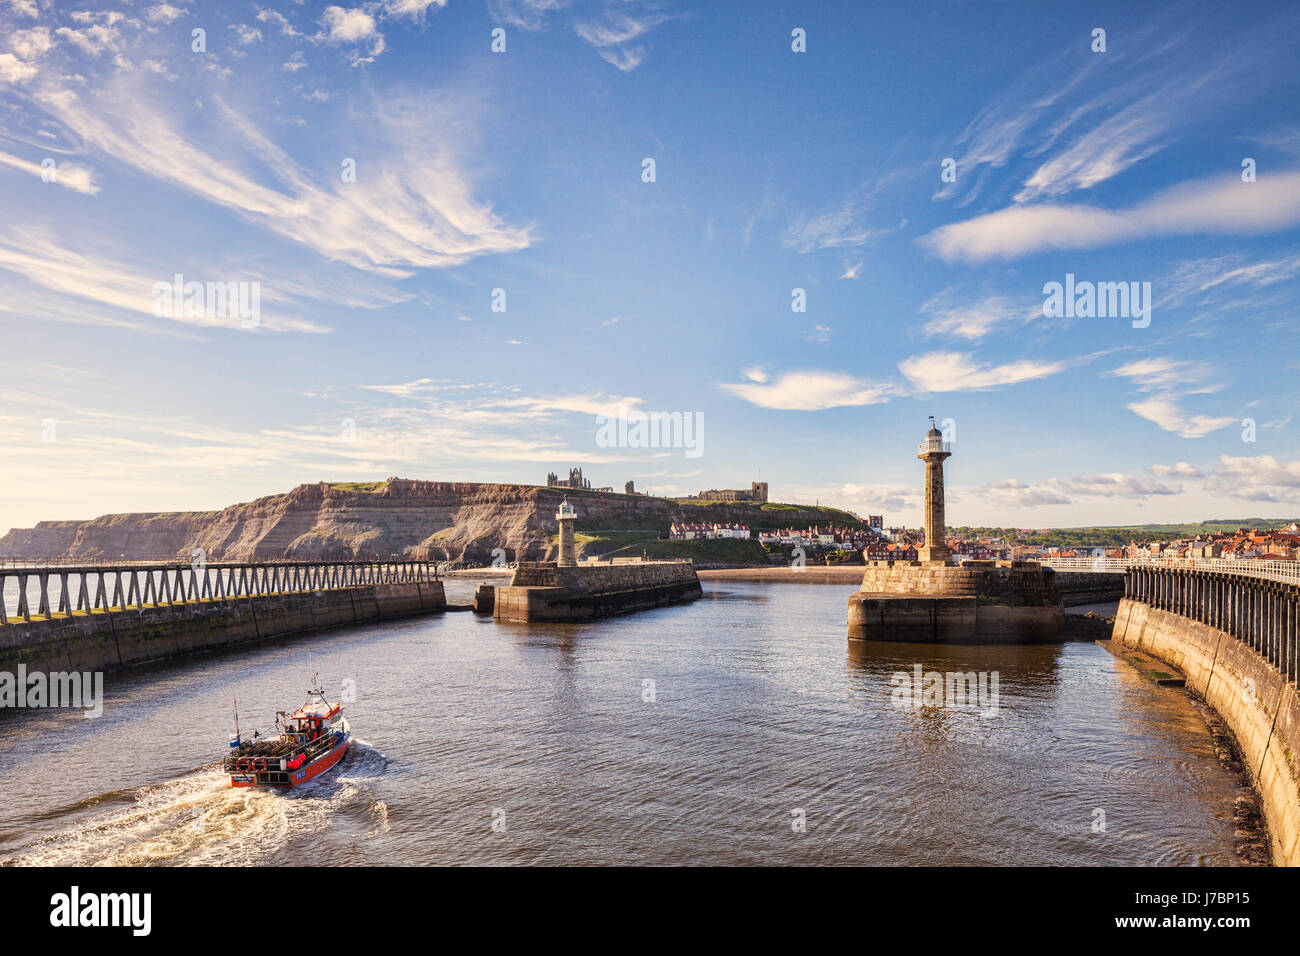 Fishing boat approaching the entrance to the harbour of old fishing port of Whitby, North Yorkshire, England, UK. Stock Photo